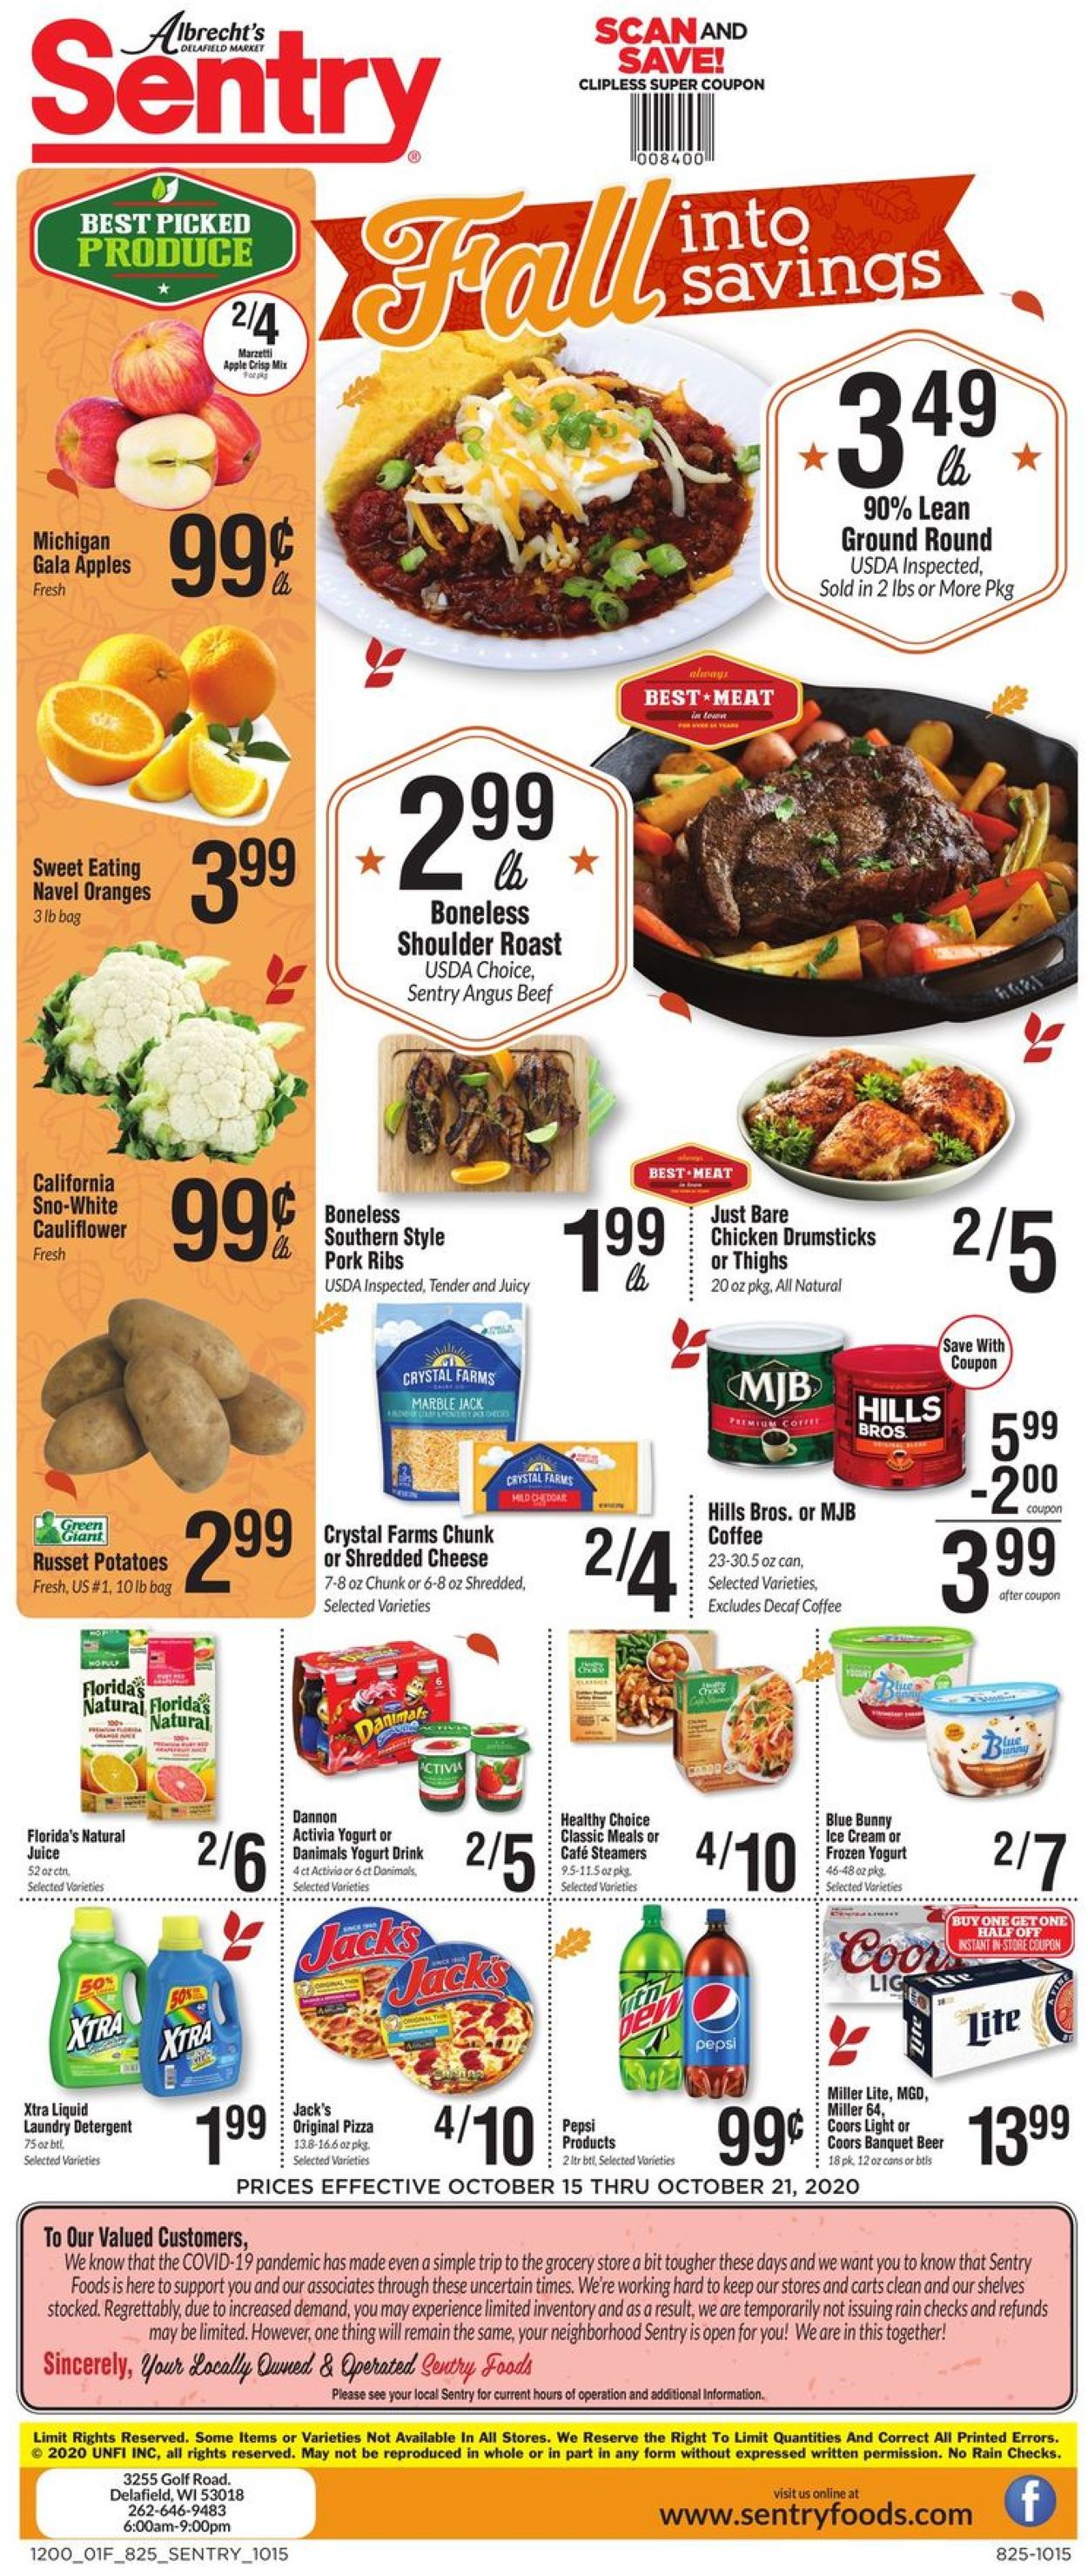 Sentry Current weekly ad 10/15 - 10/21/2020 [2] - frequent-ads.com